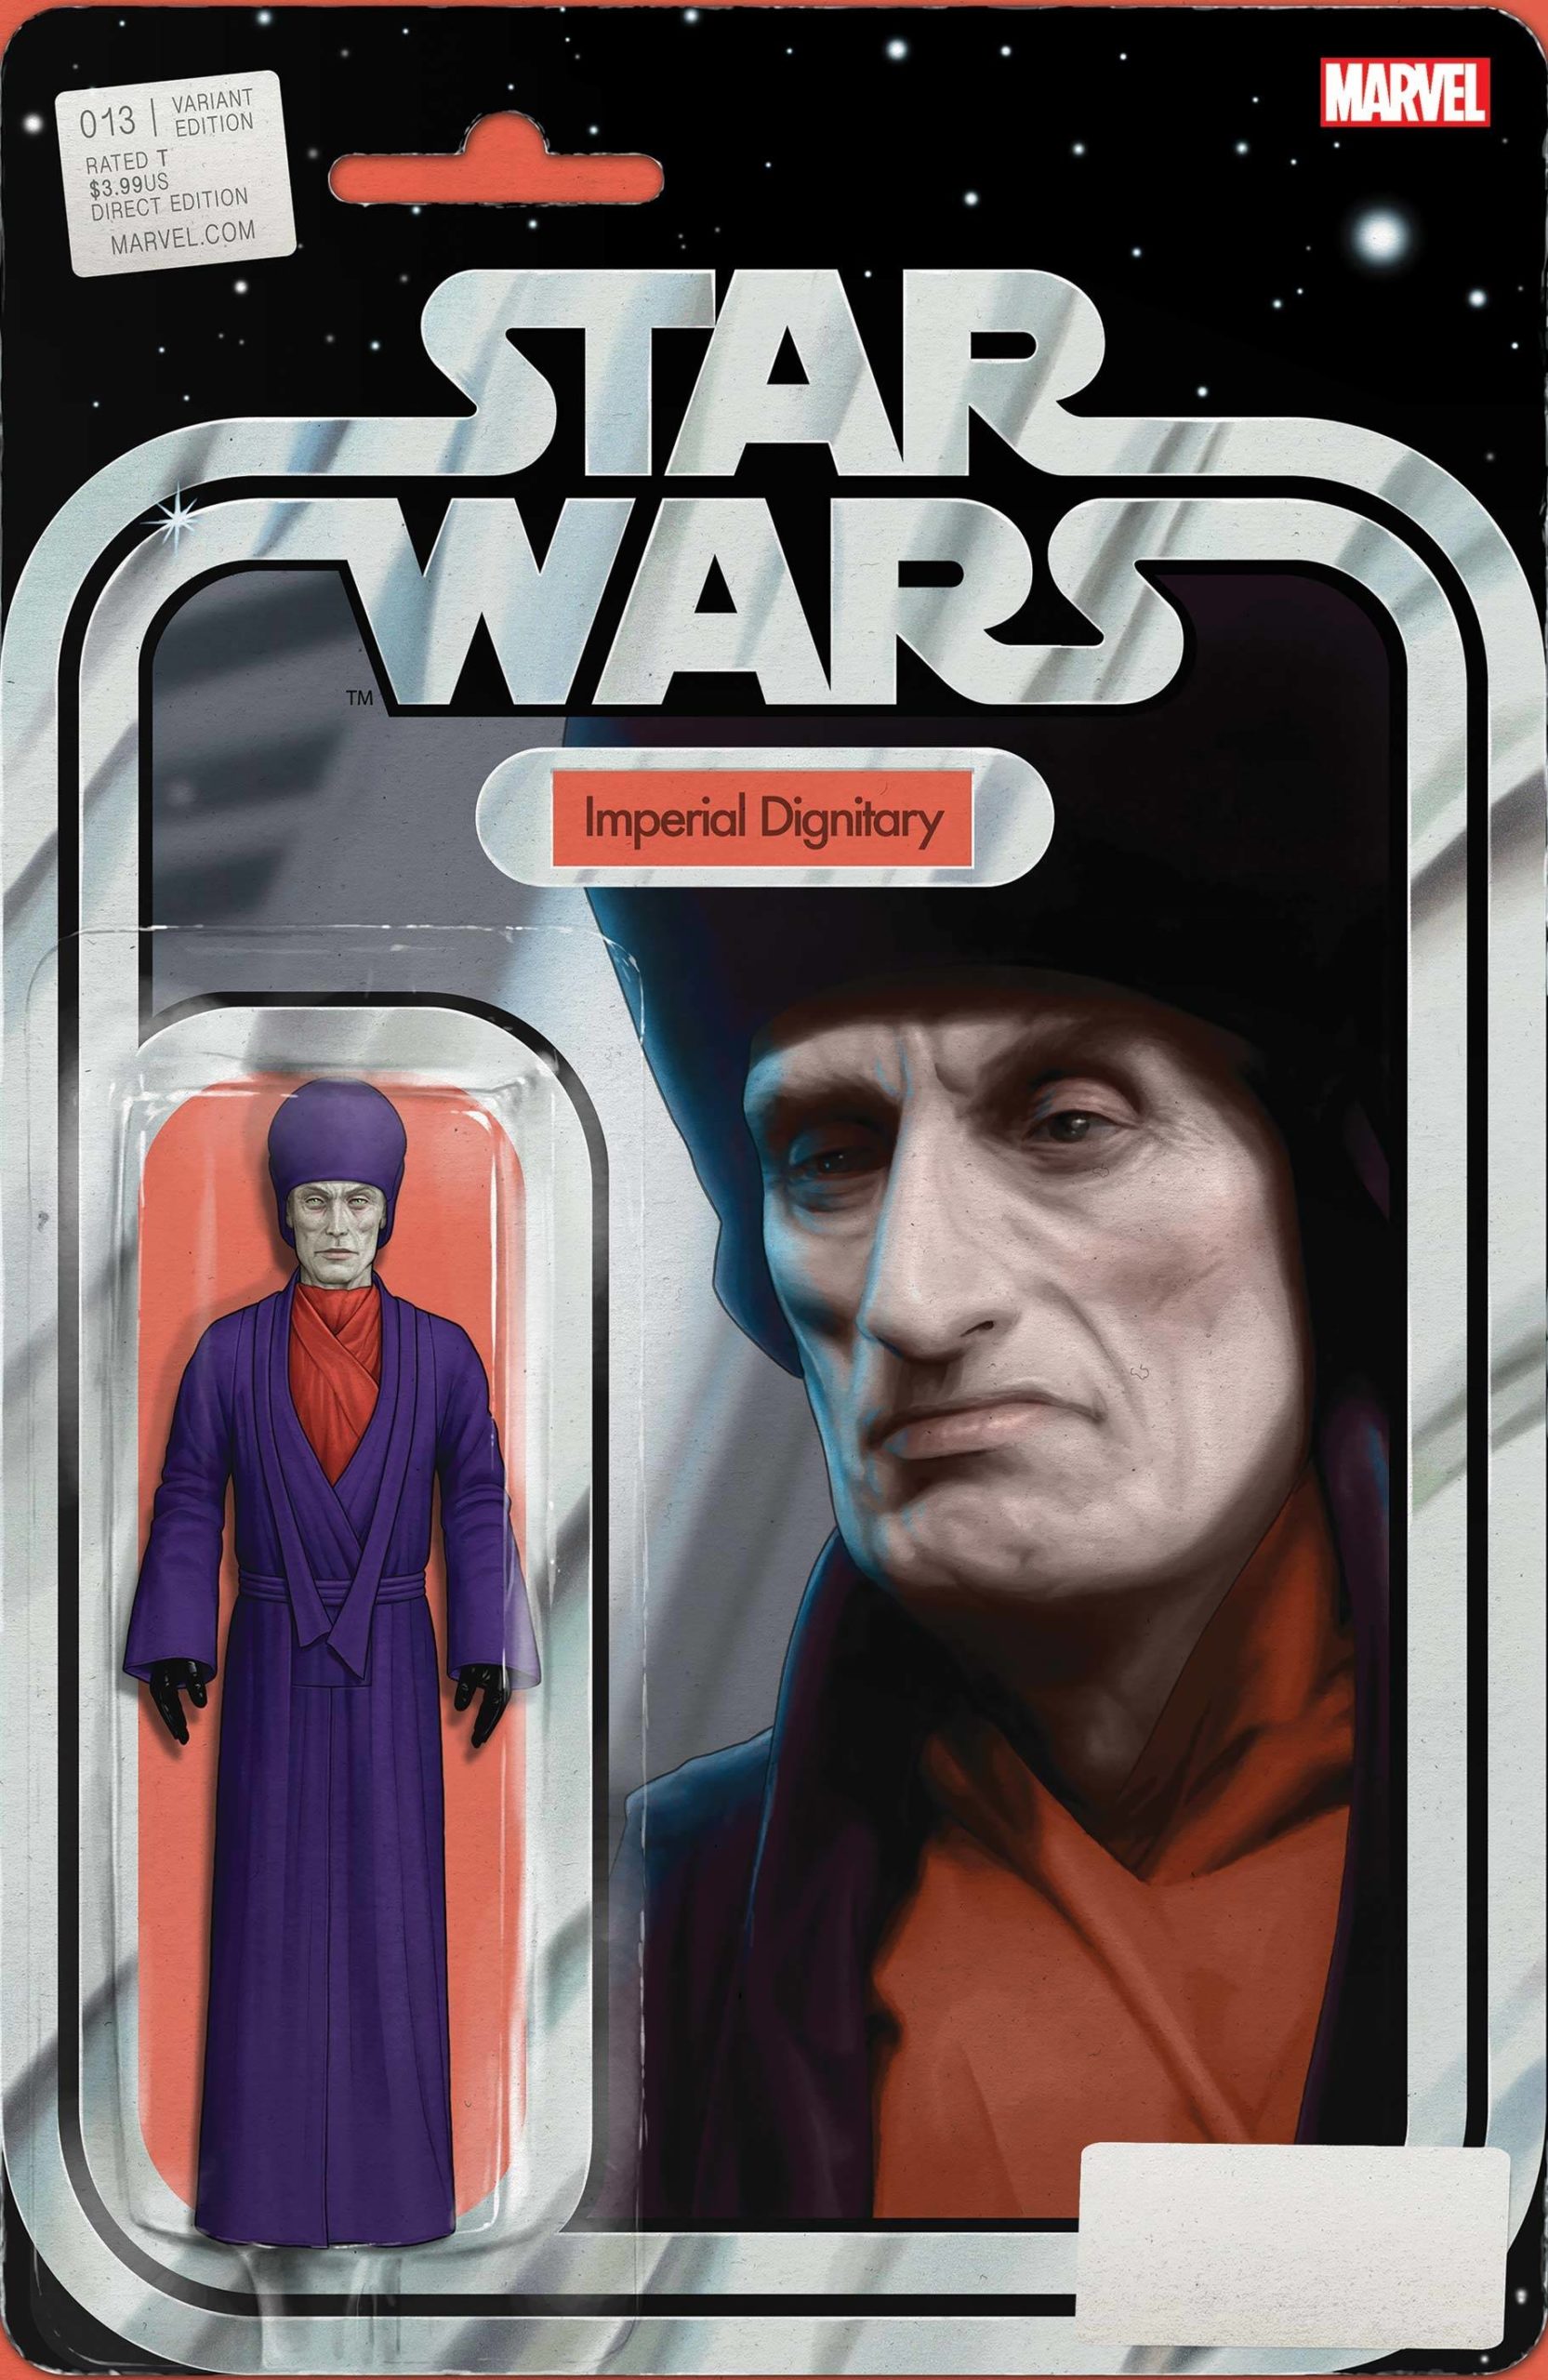 Star Wars #13 ("Imperial Dignitary" Action Figure Variant Cover) (12.05.2021)